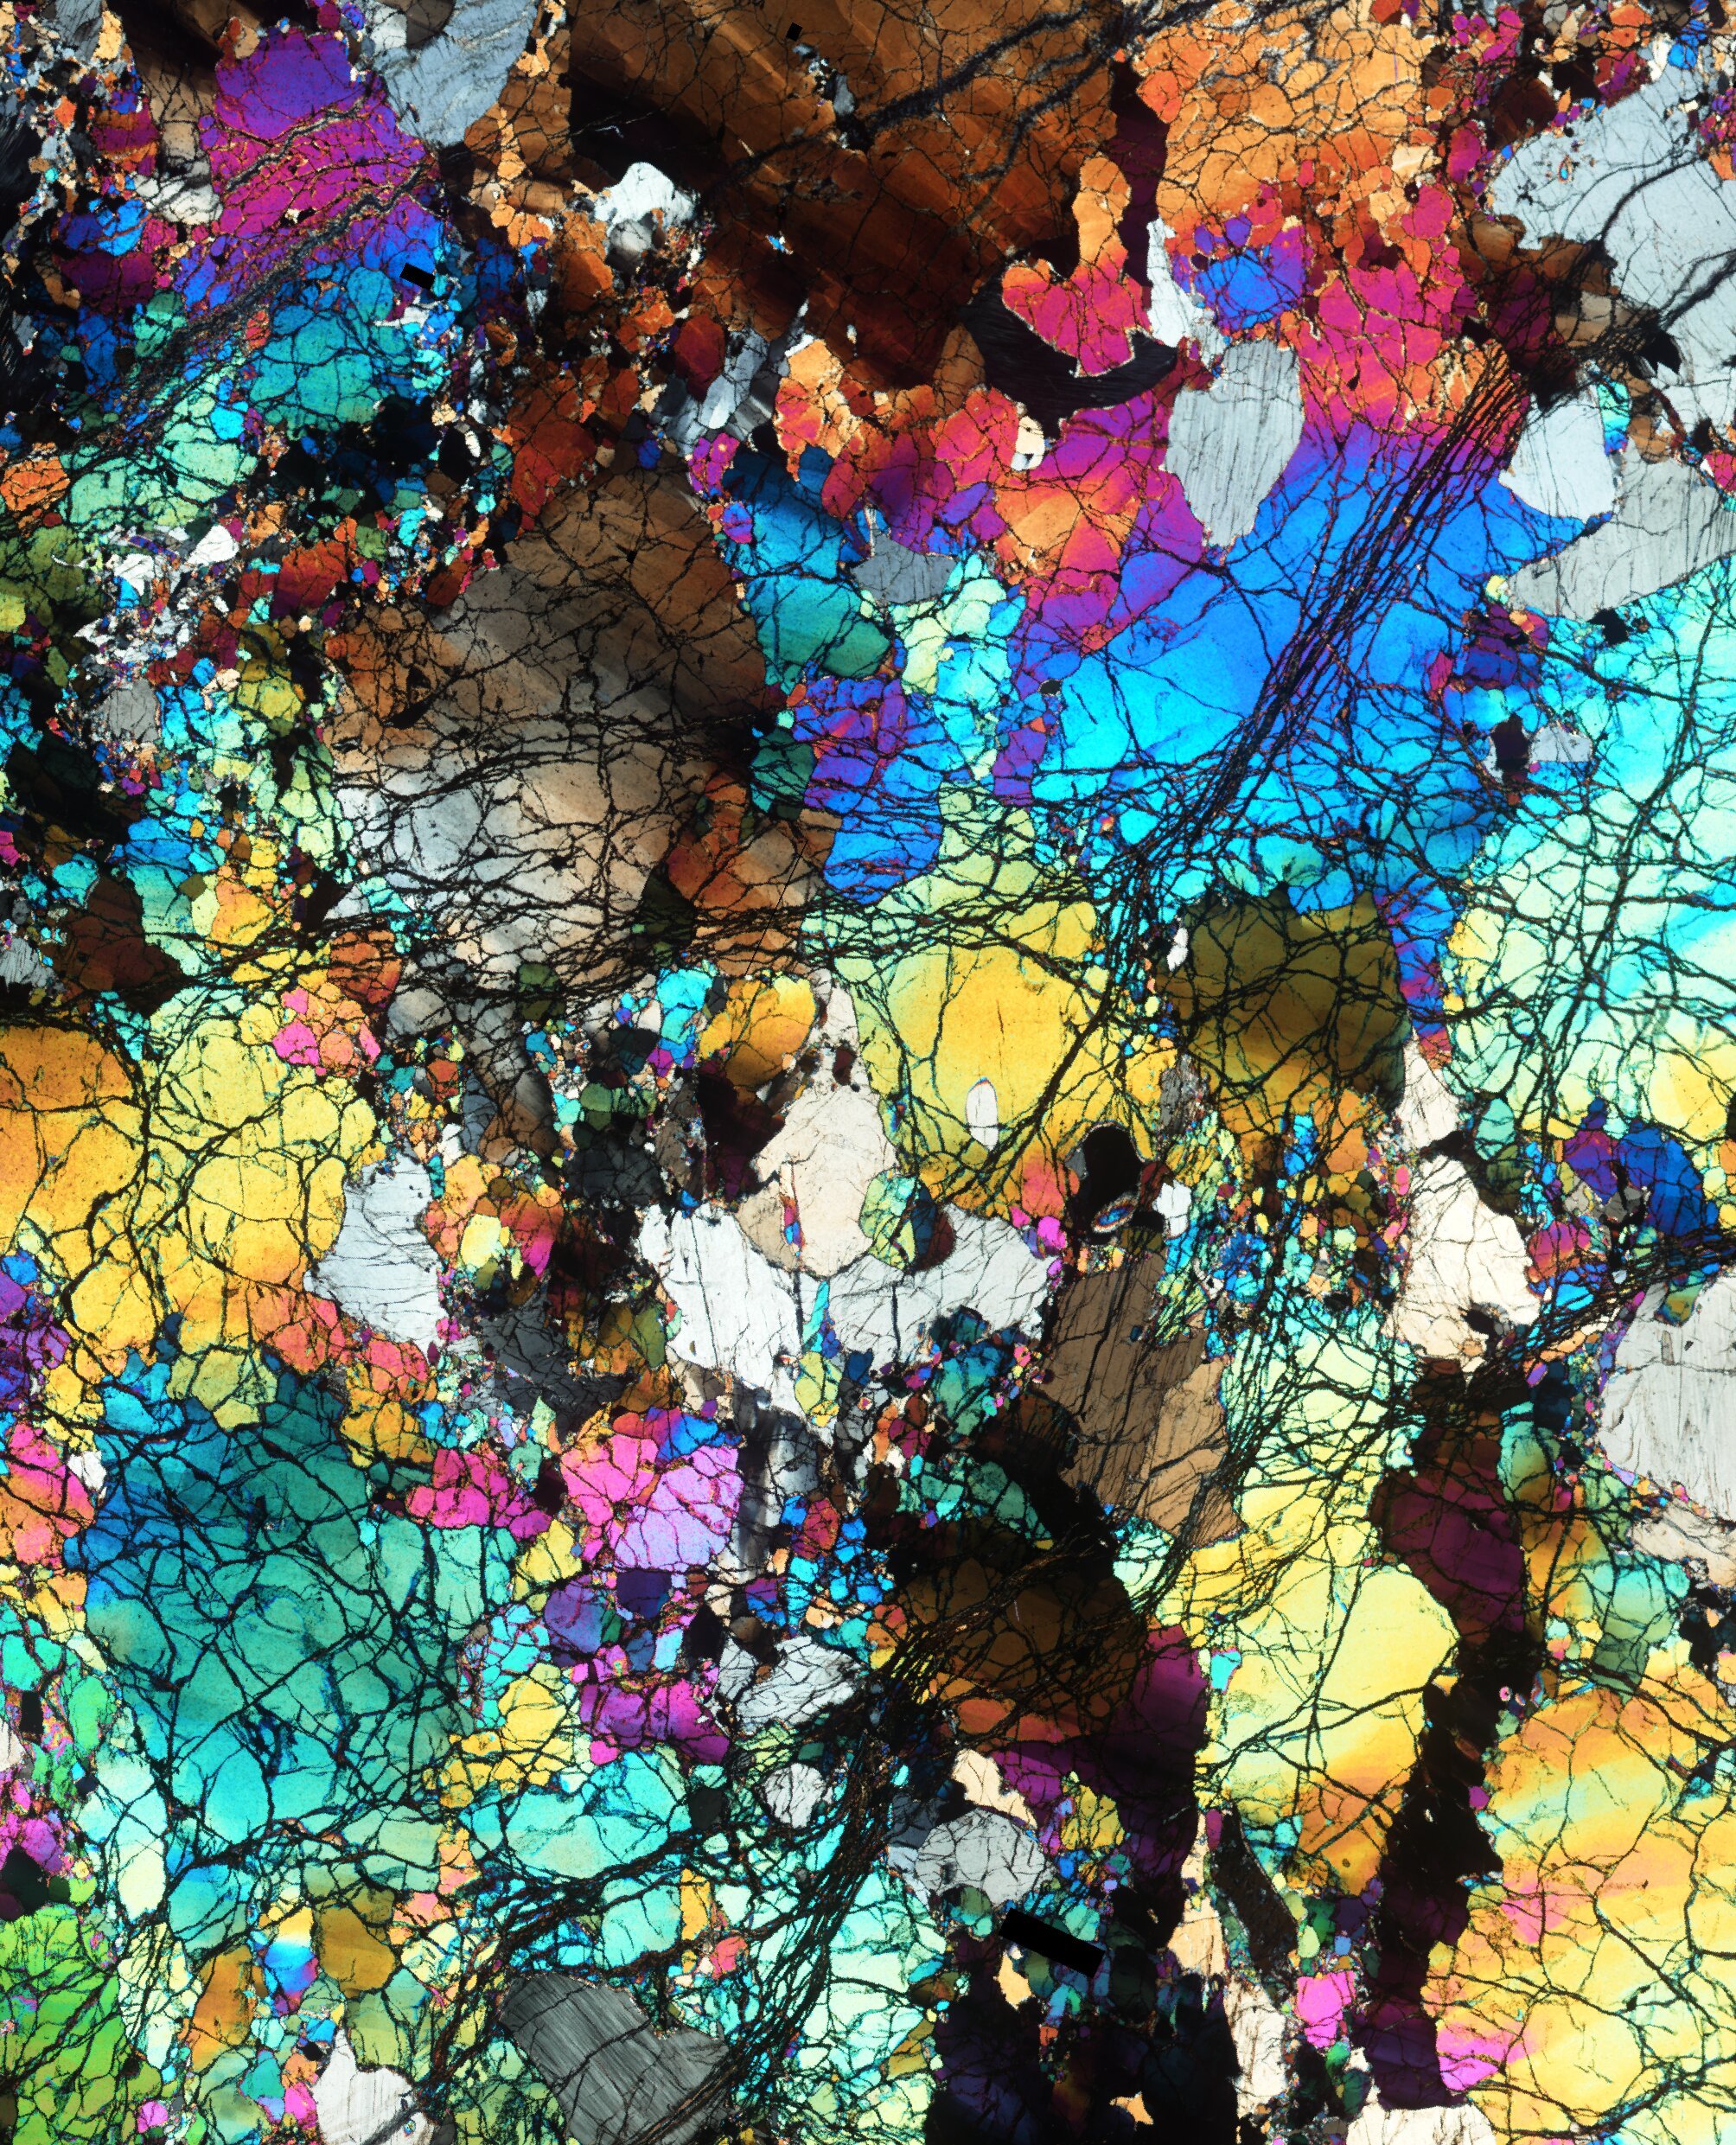 New study supports stable mantle chemistry dating back to Earth's early geologic history